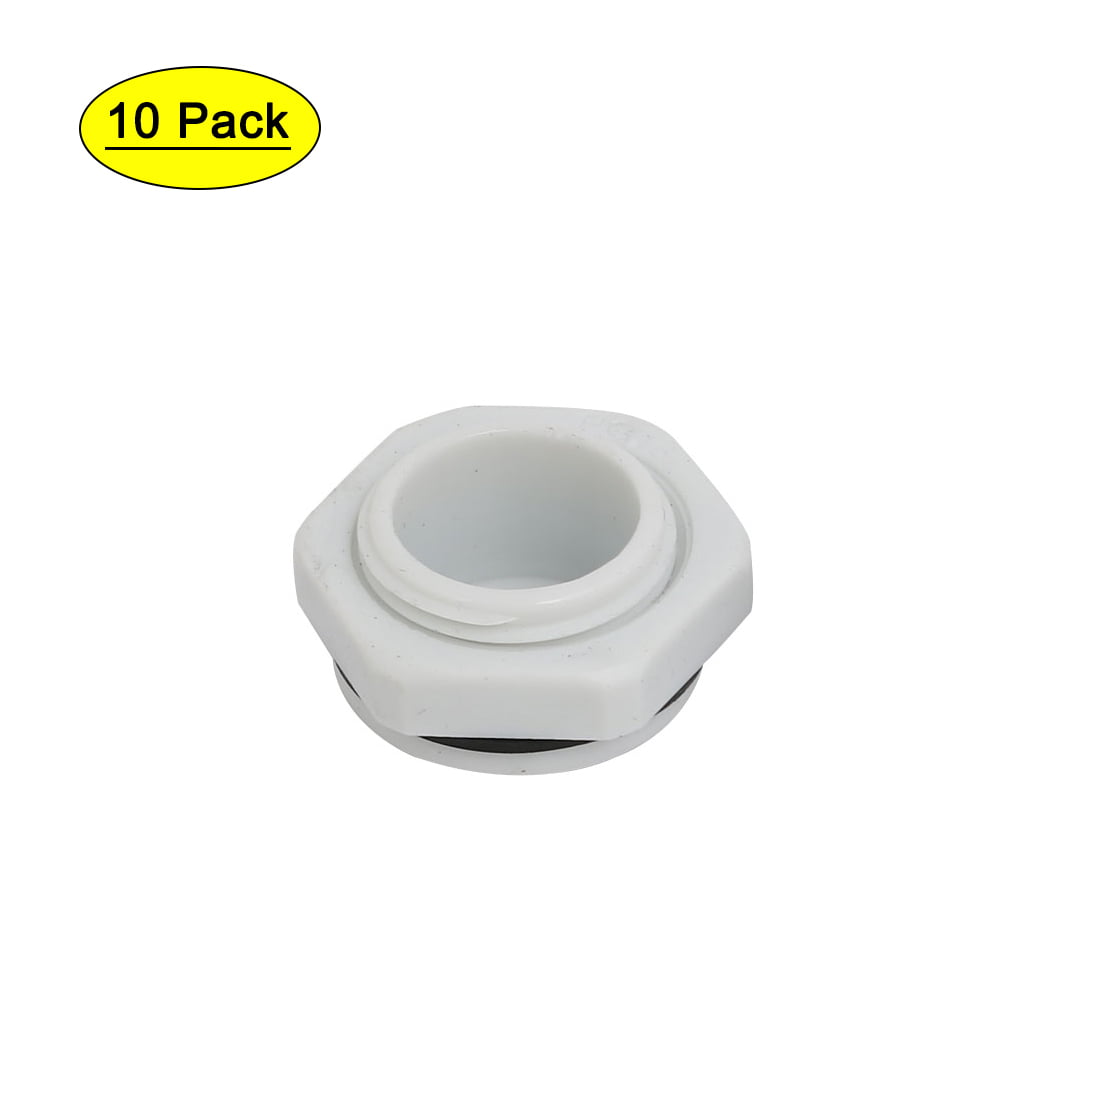 3pcs Details about   PG16 Nylon Male Threaded Cable Gland Screw End Cap Cover with Washer 